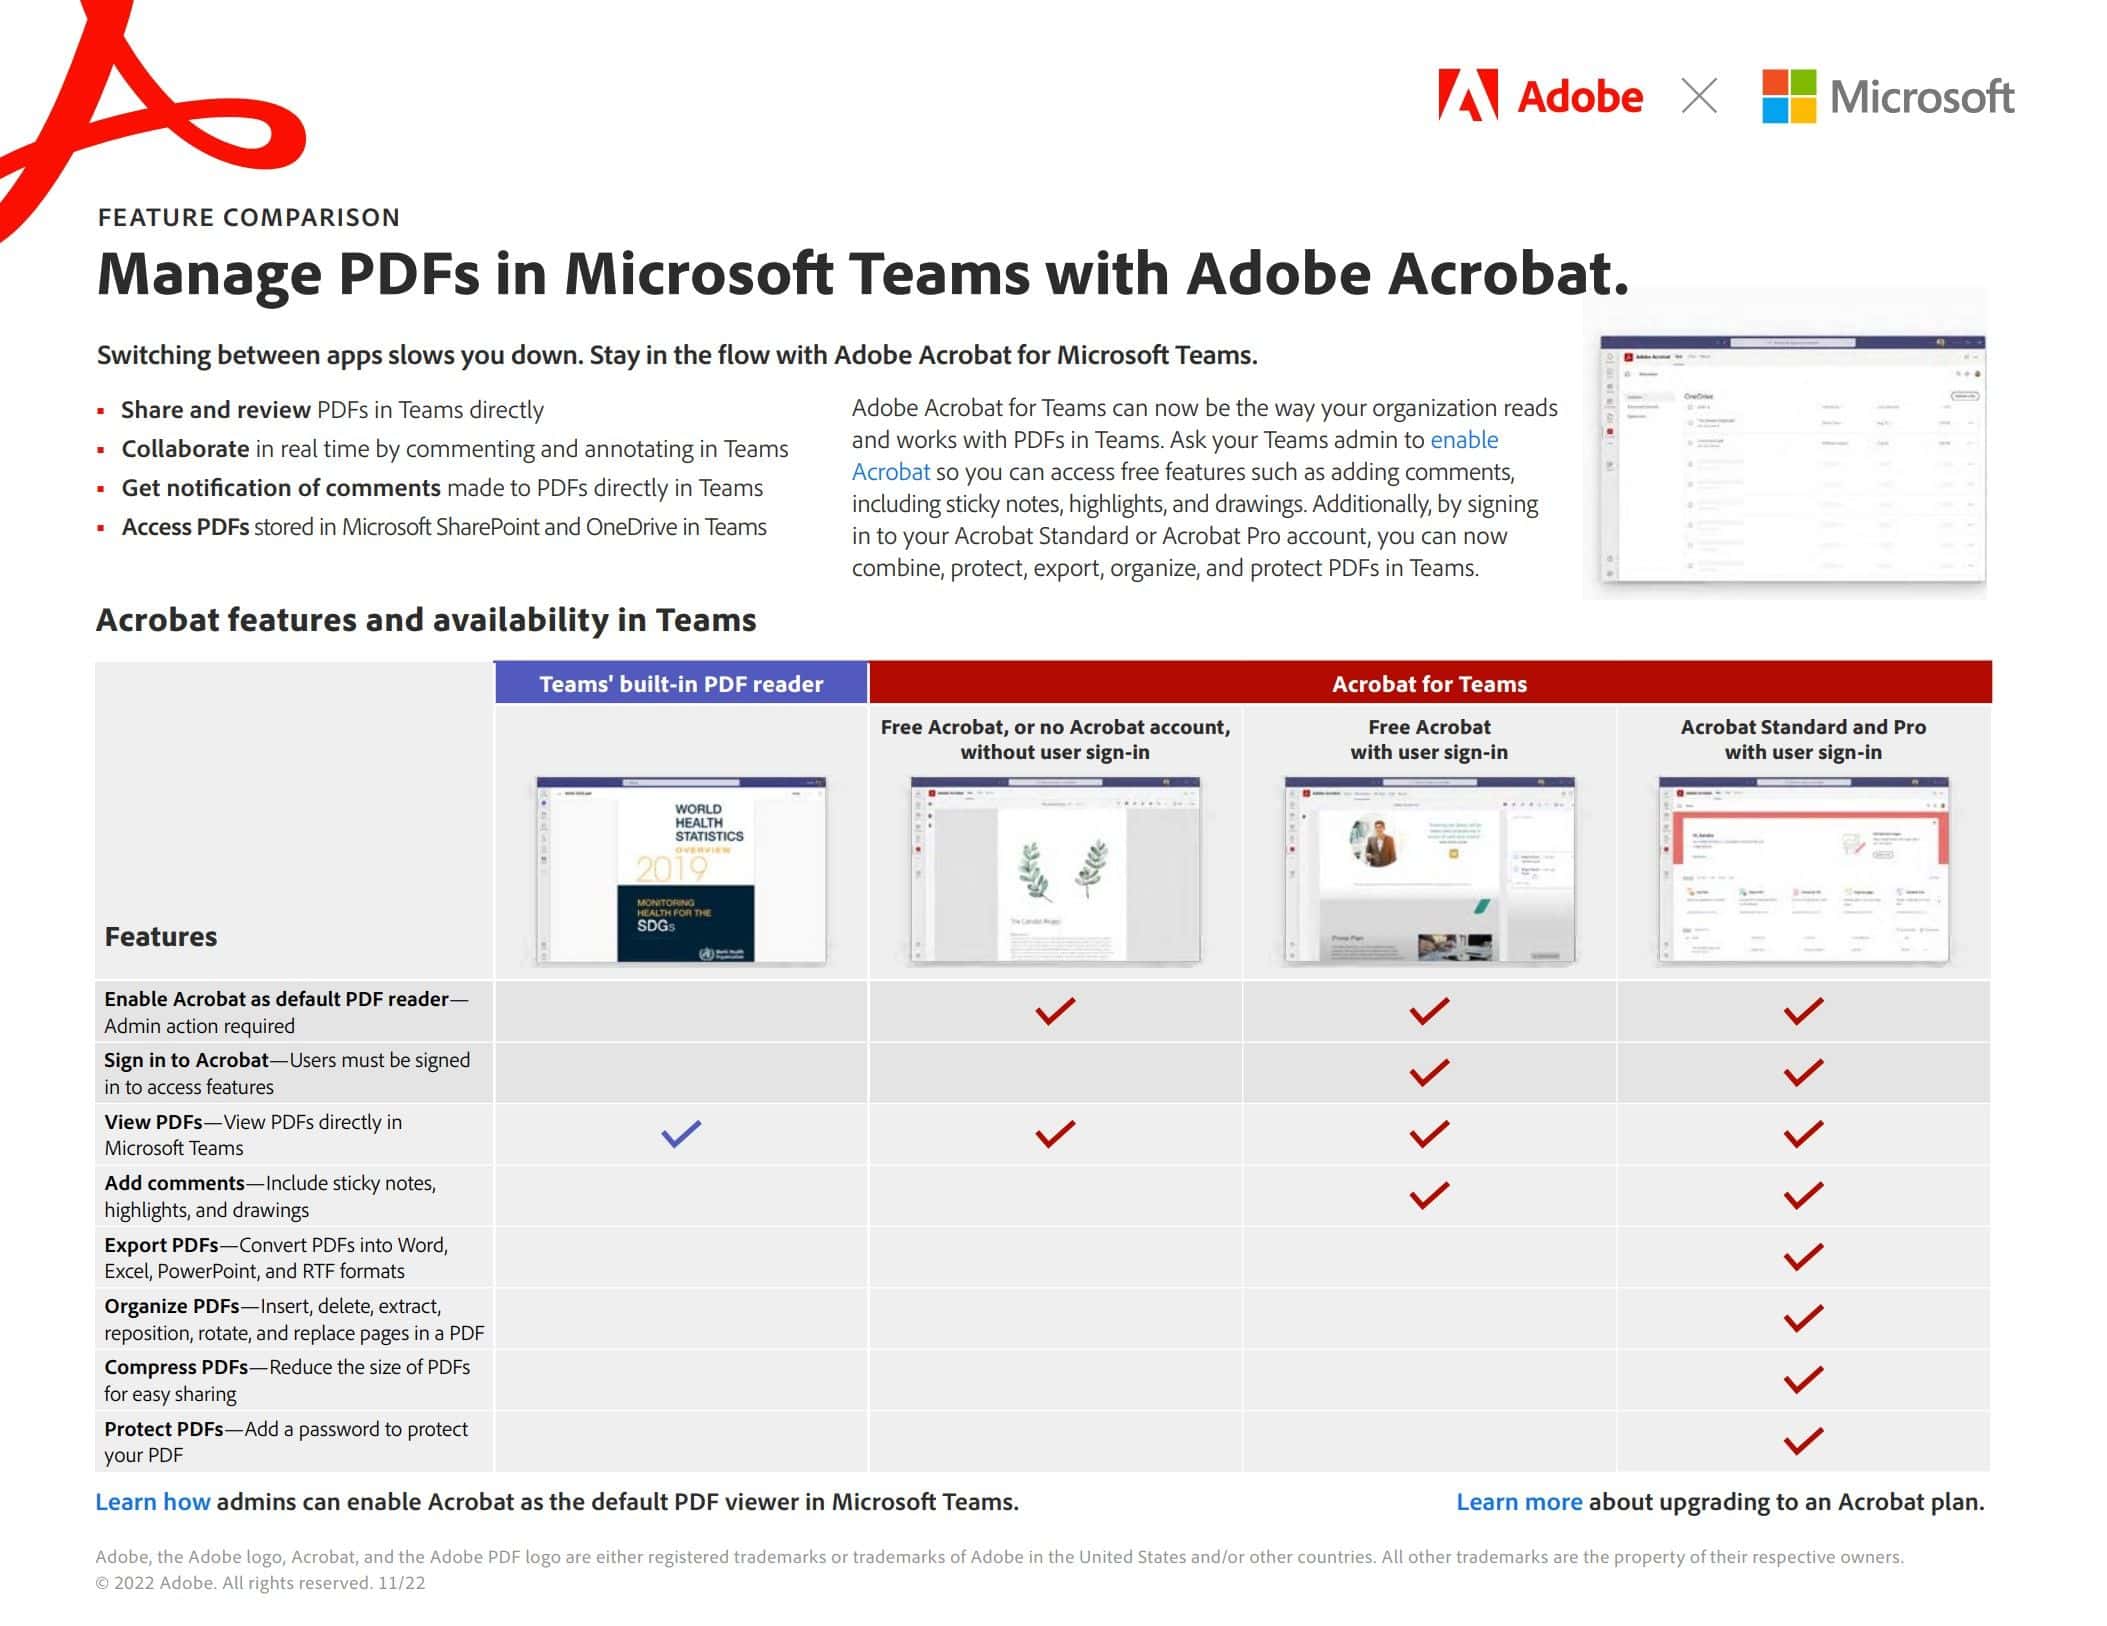 Adobe Acrobat integration into Microsoft Teams - features for free and paid Acrobat users